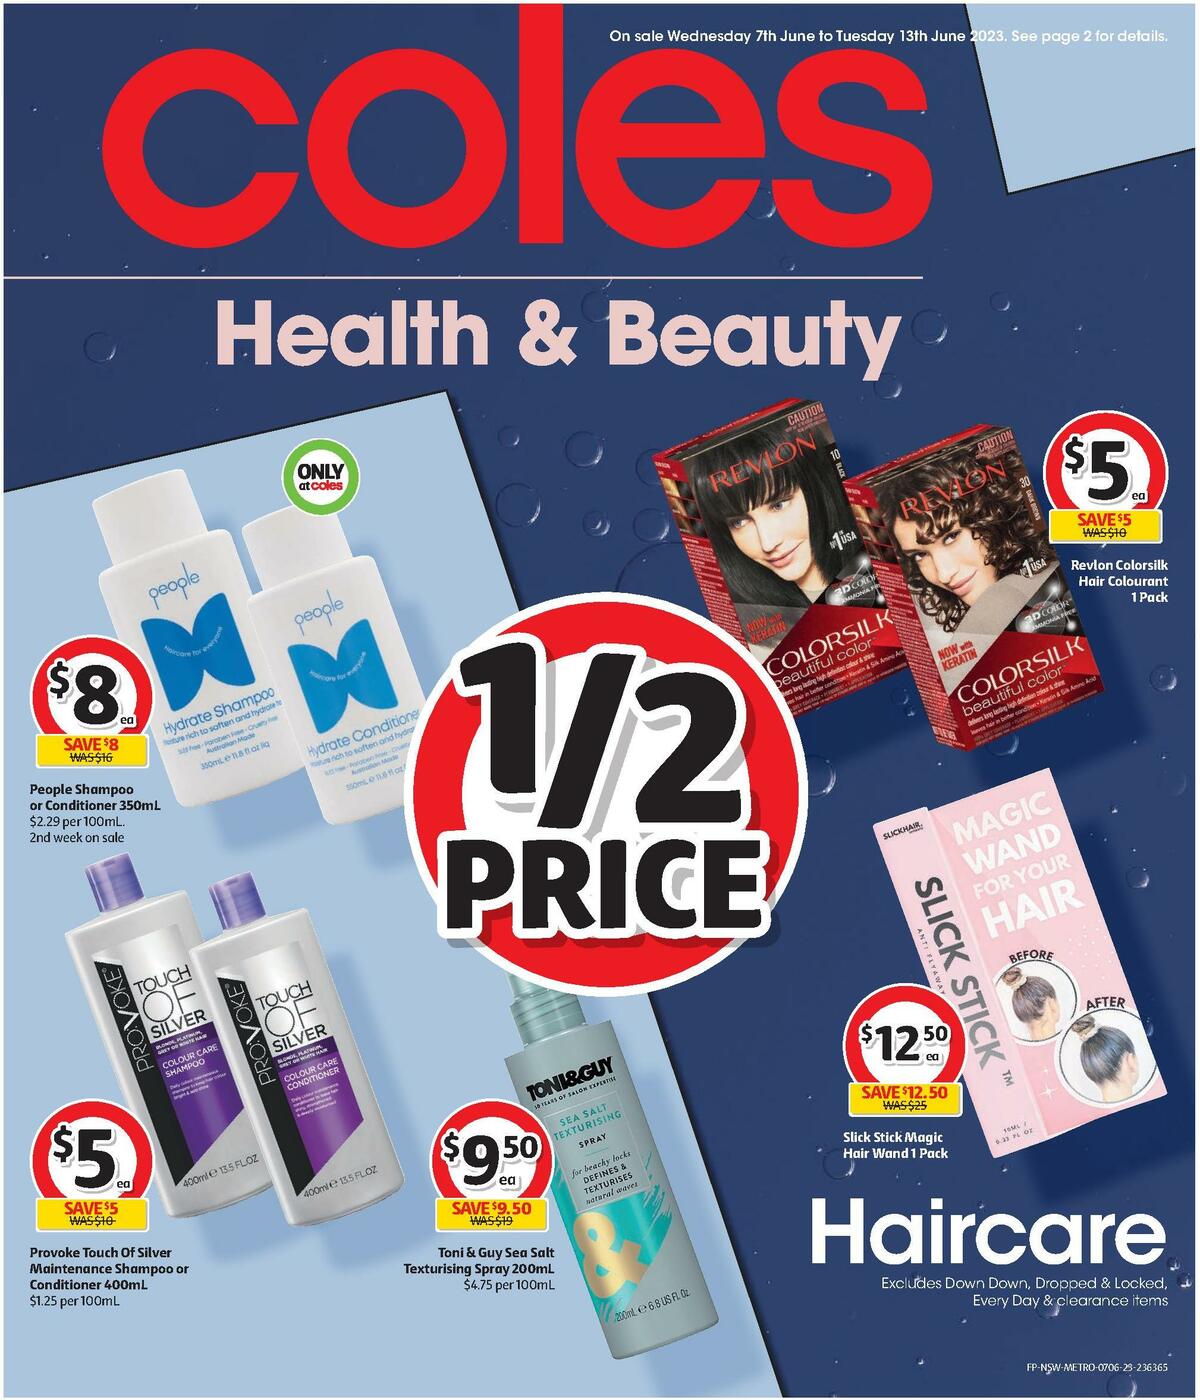 Coles Health & Beauty NSW METRO Catalogues from 7 June